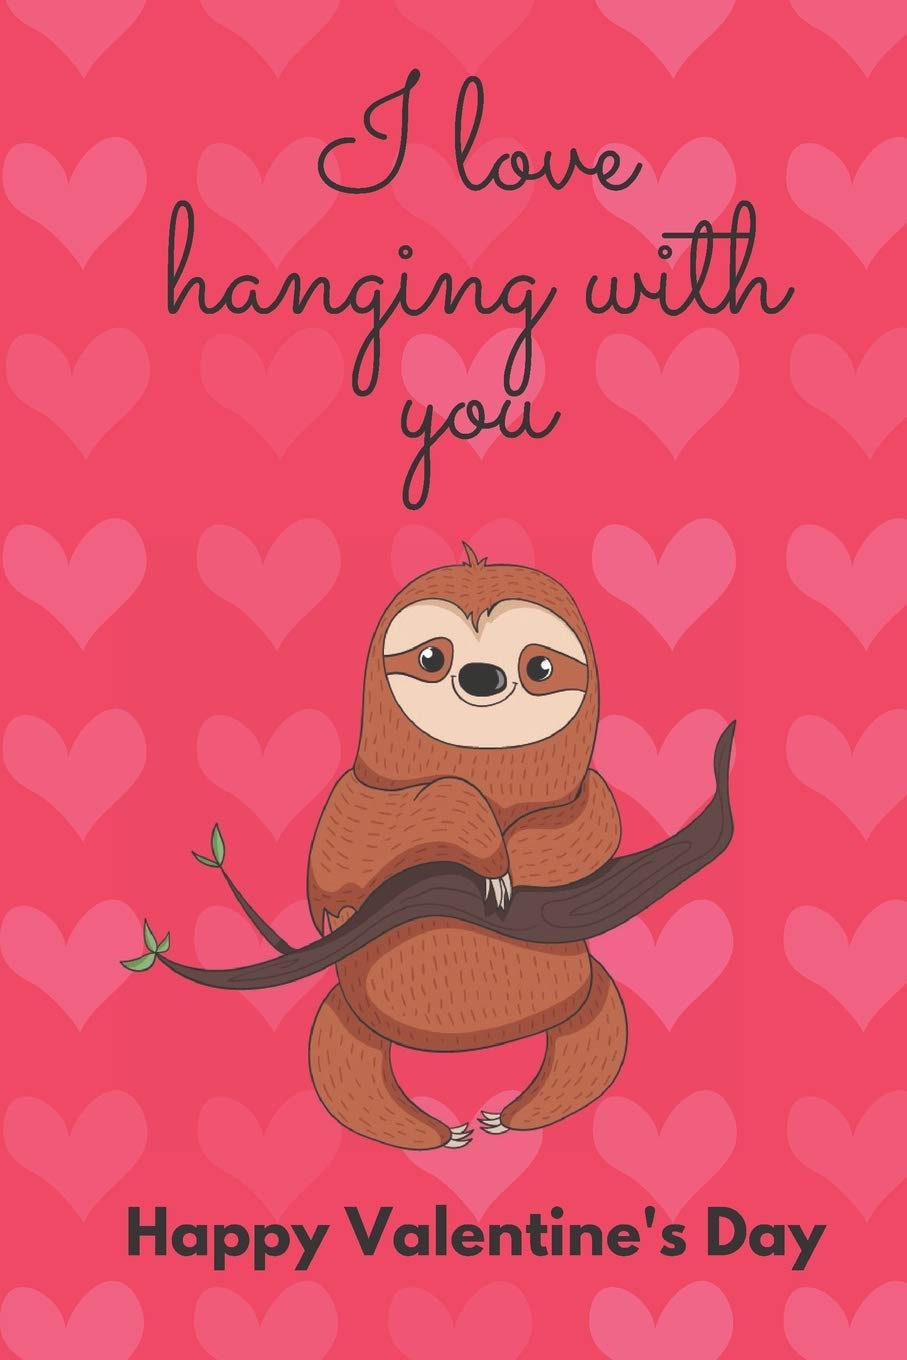 I LOVE HANGING WITH YOU. HAPPY VALENTINE'S DAY.: SLOTH COVER UNIQUE GREETING CARD ALTERNATIVE: Designs, D: 9798609360472: Books